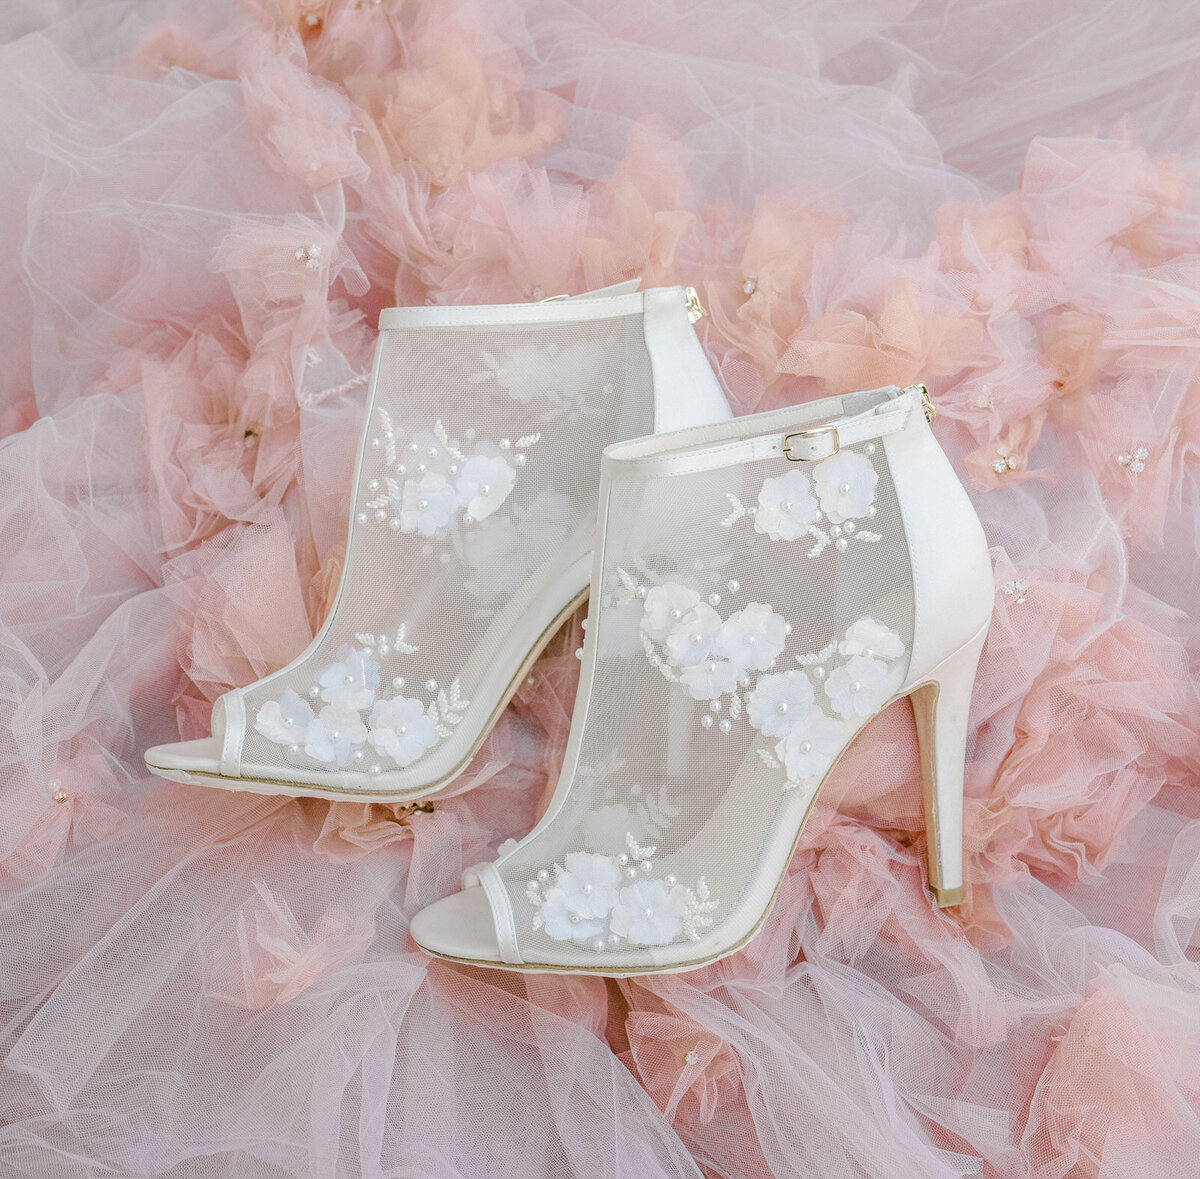 Bella Belle Shoes - Belle by Joy Proctor - Serenity Photography -4